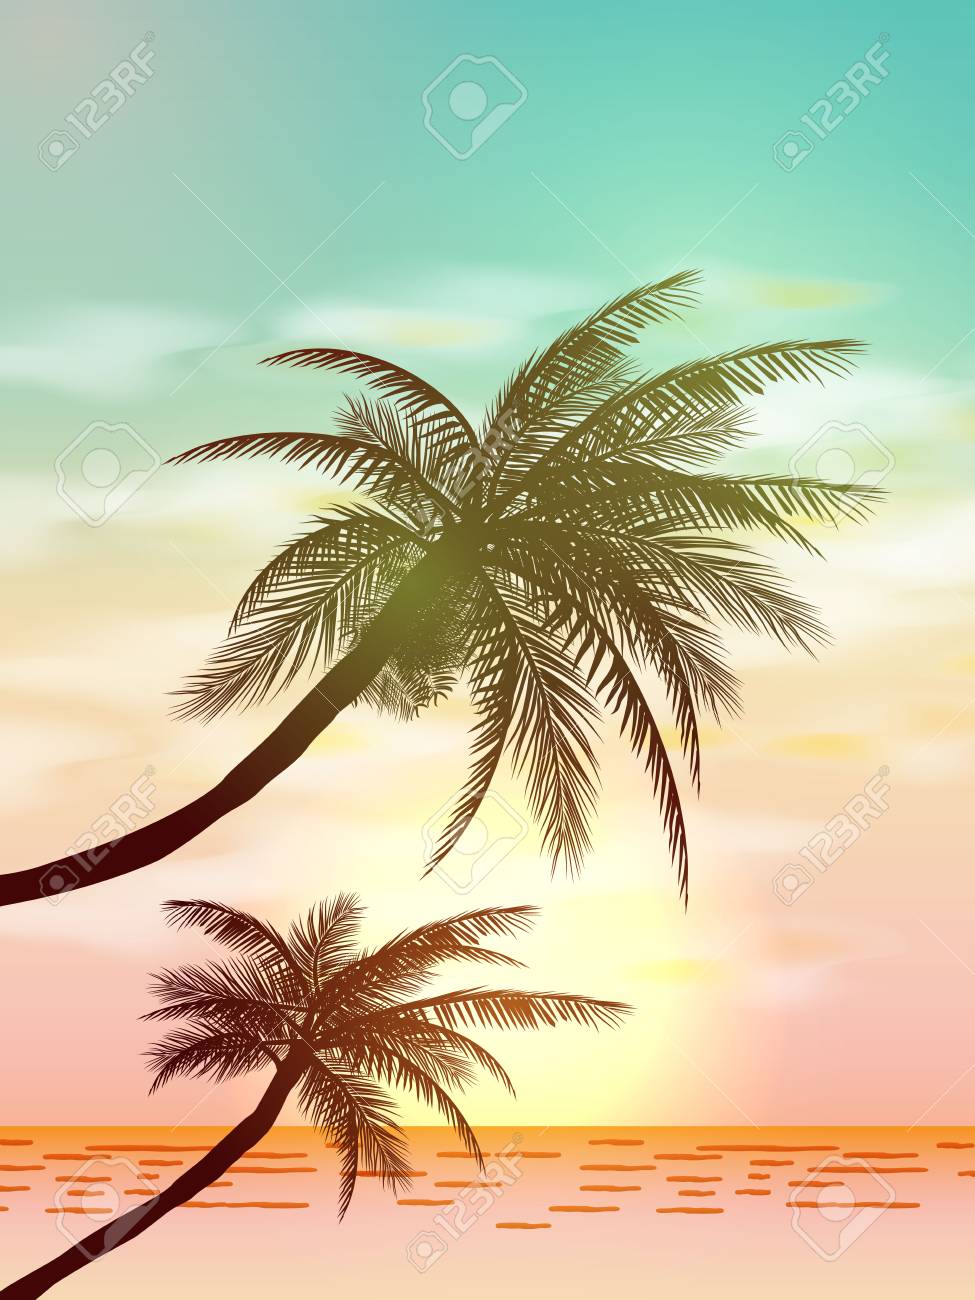 Summer Tropical Background With Palms Sky And Sunset